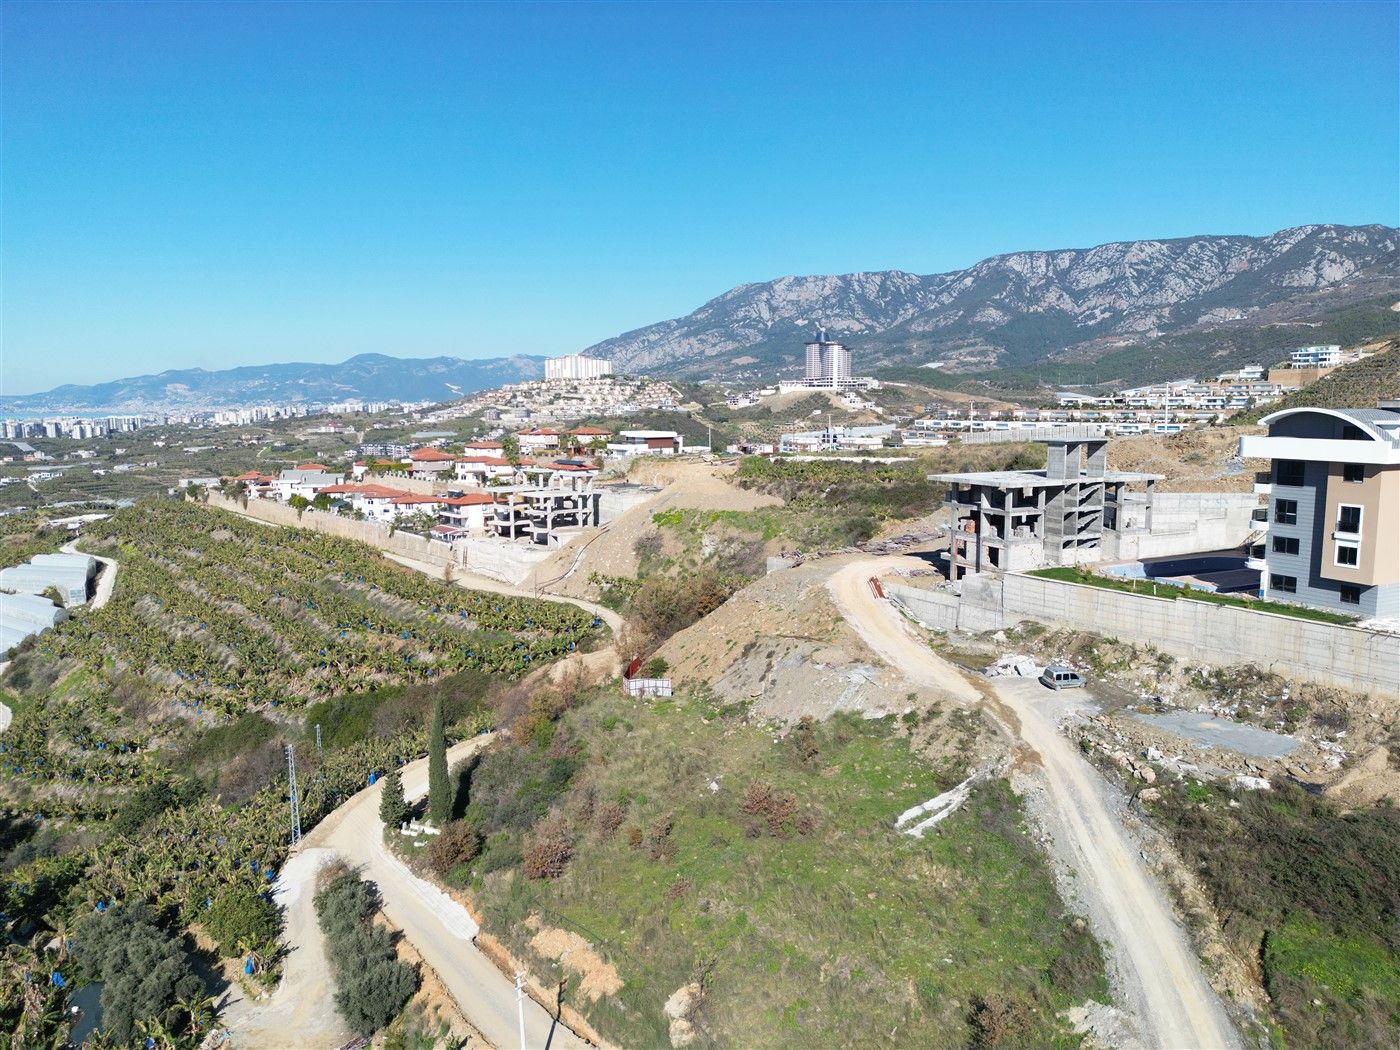 Land plot in Kargicak overlooking the sea and Alanya Castle